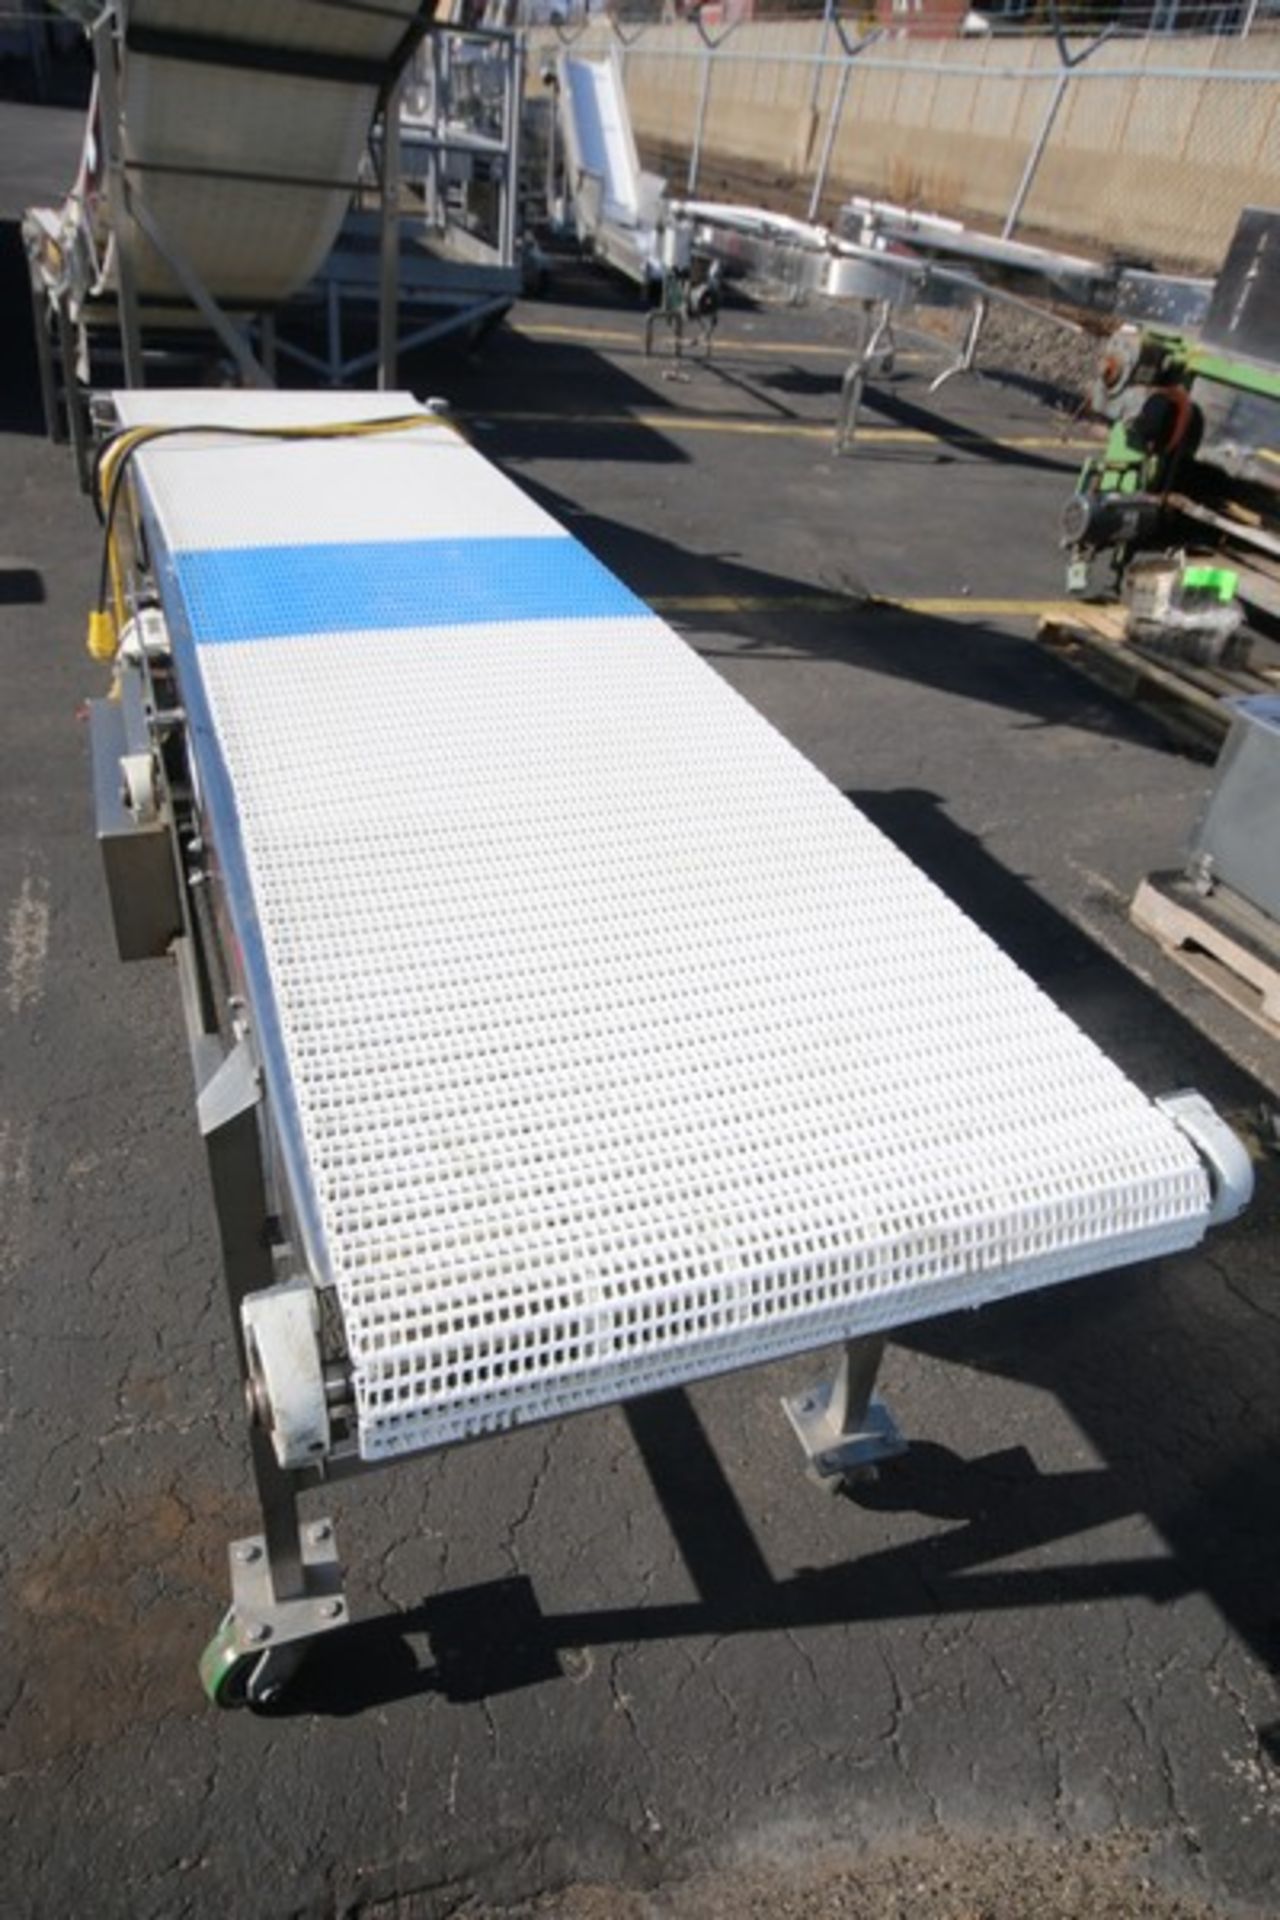 Laughlin Corp / Dawn 92" L x 33" H S/S Portable Belt Conveyor with 22" W Intralox Type Plastic Belt, - Image 2 of 7